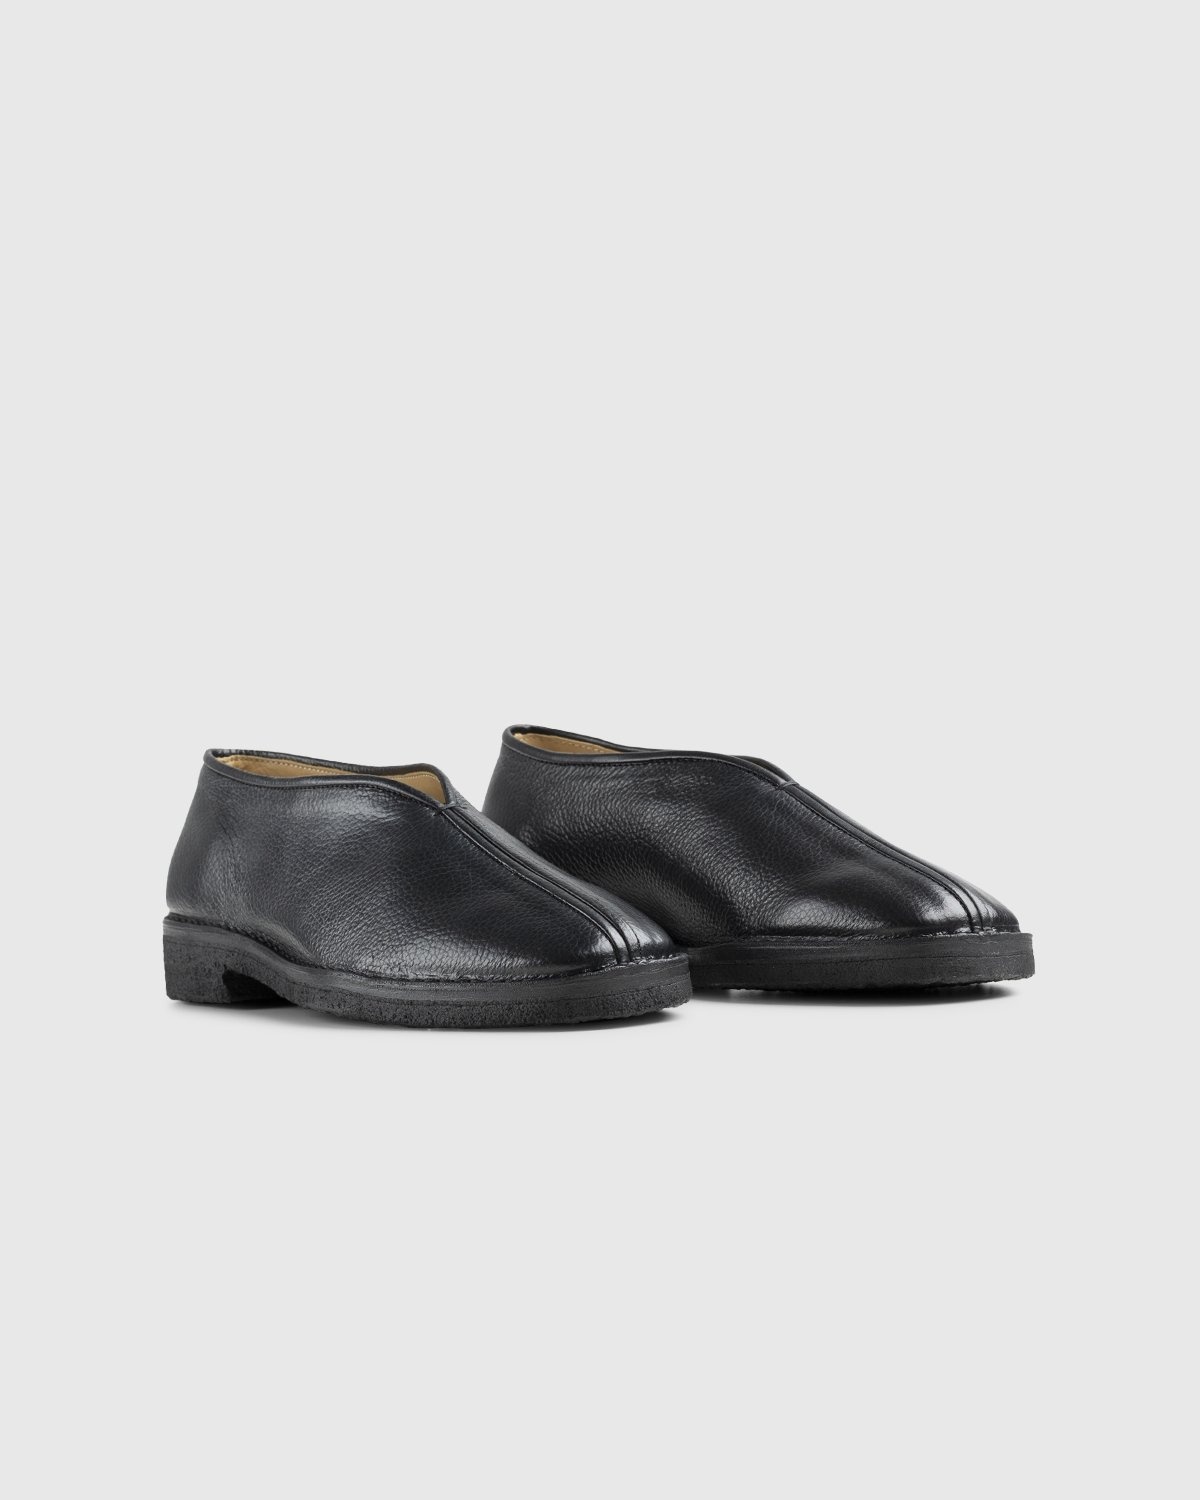 Lemaire – Leather Chinese Slippers Black - Shoes - Black - Image 4